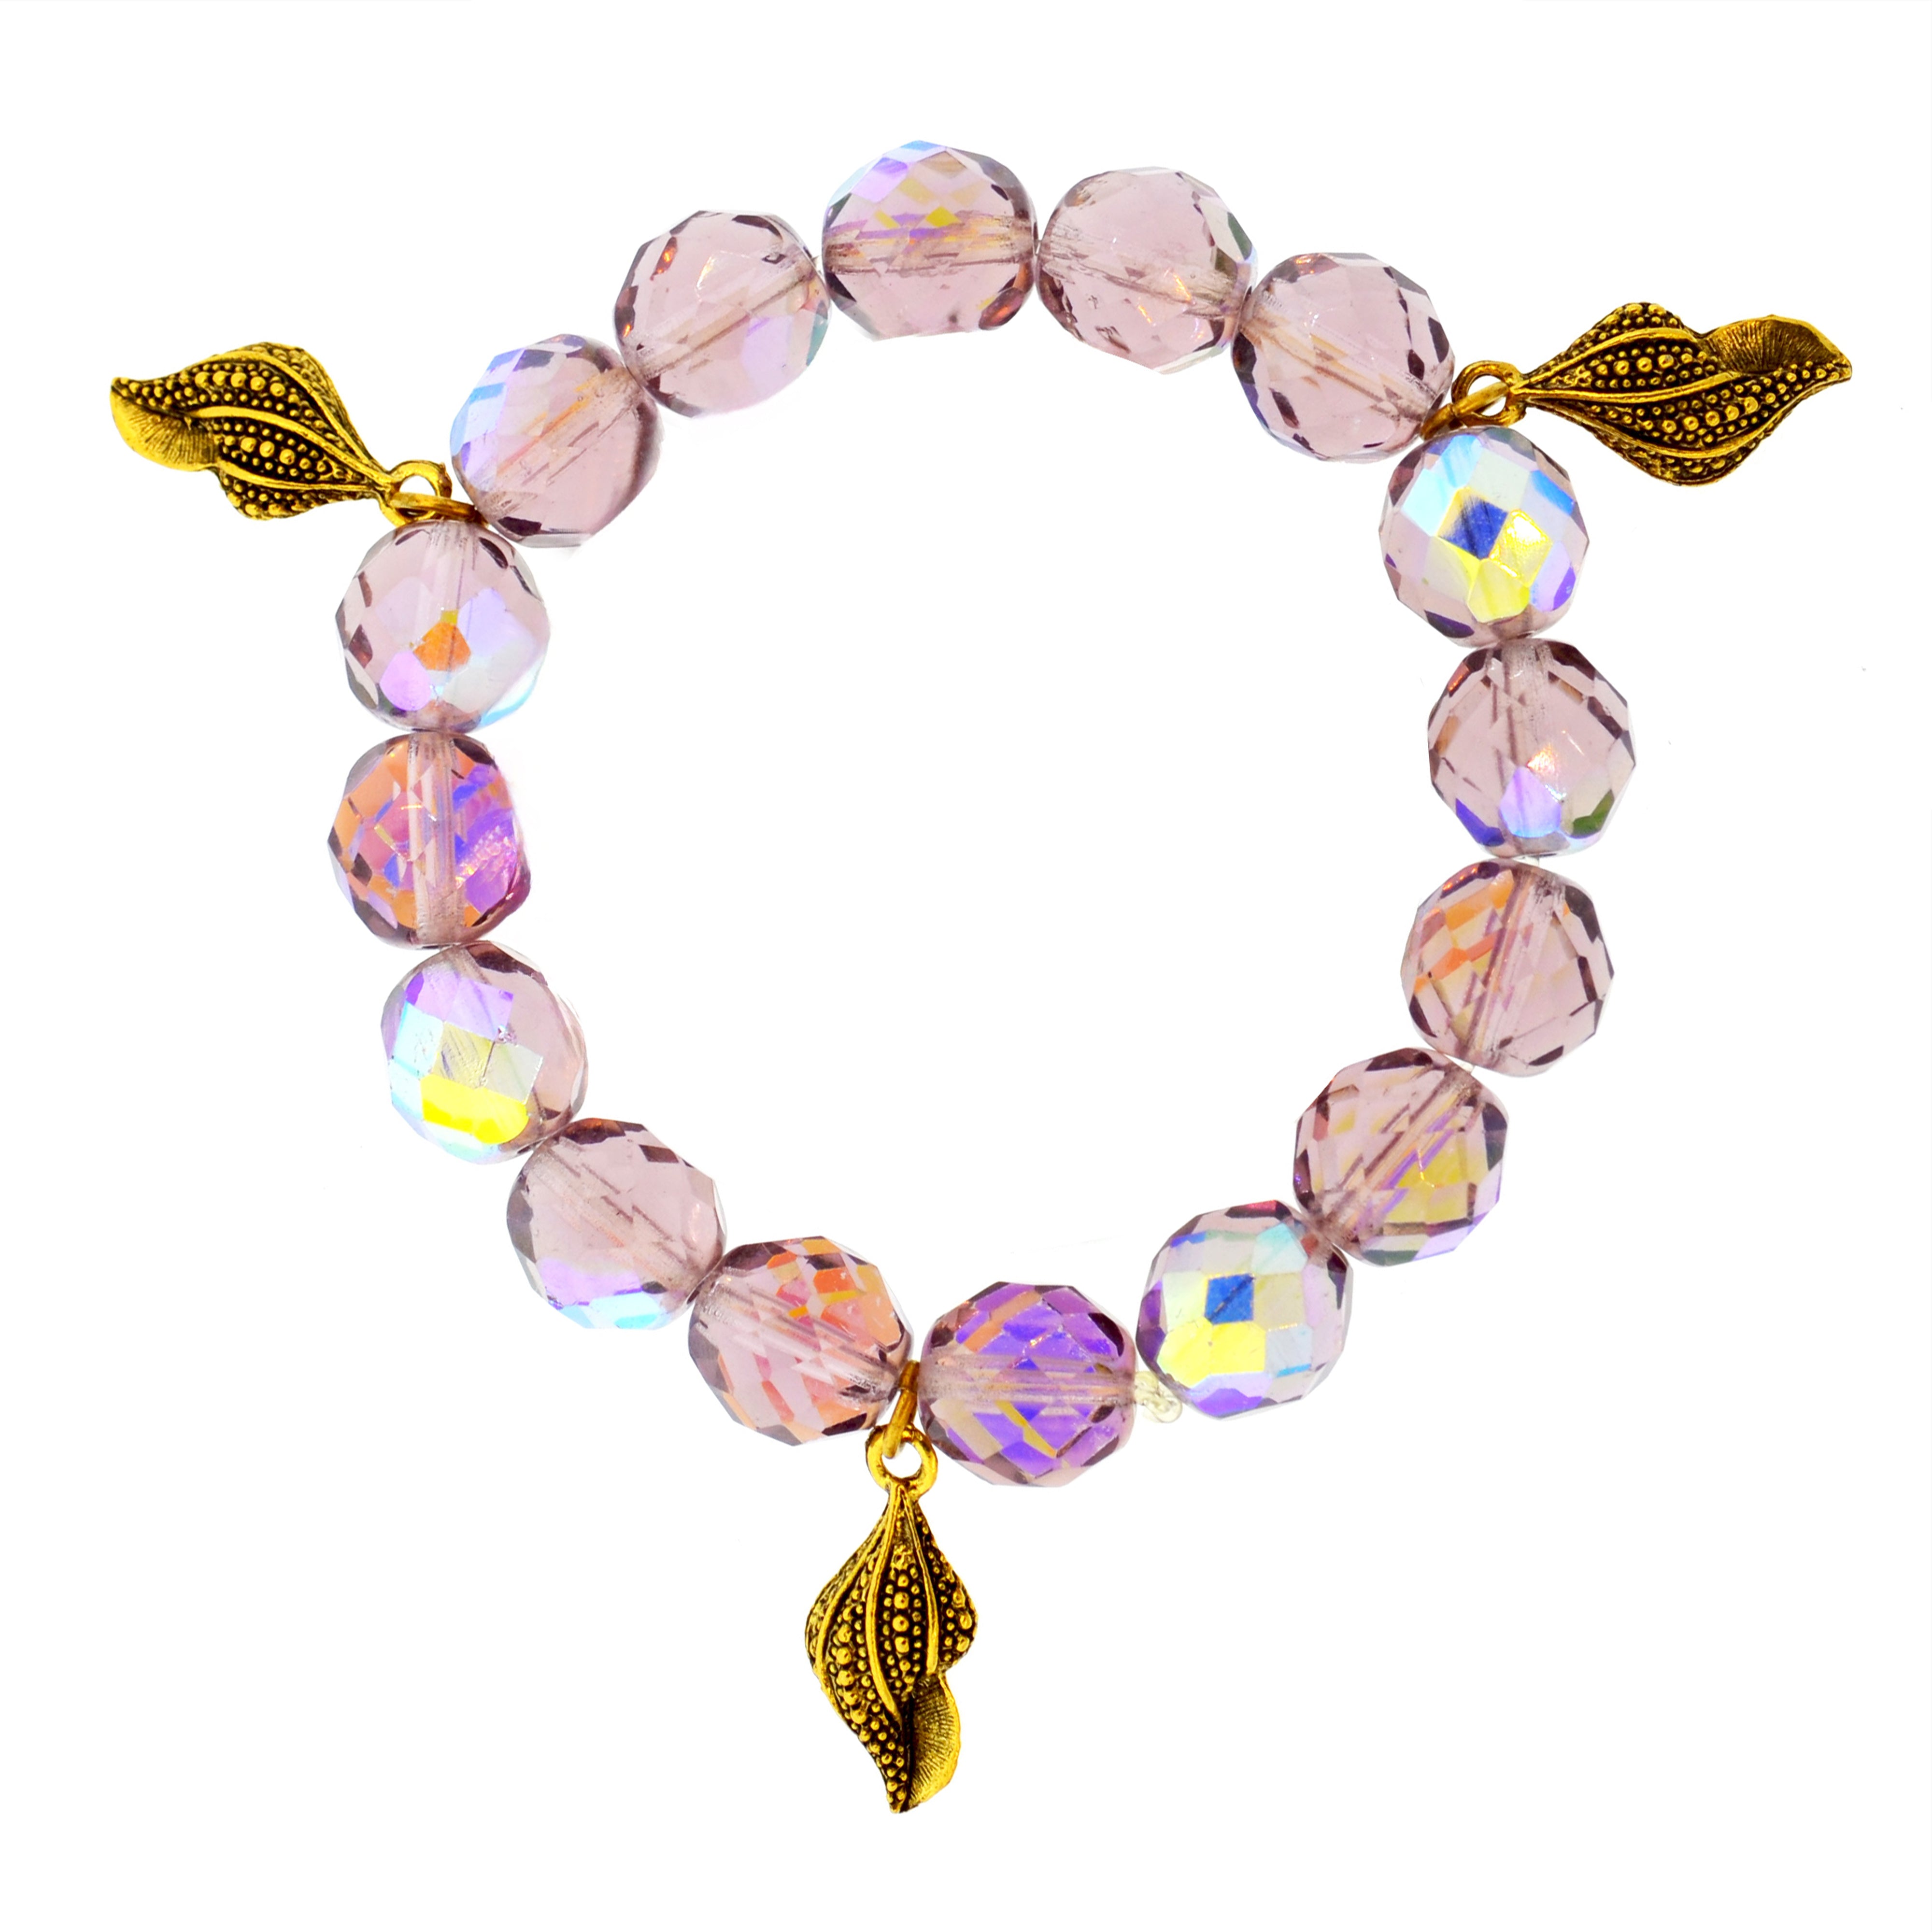 Iridescent Lavender Galapagos Conch Shell Bracelet